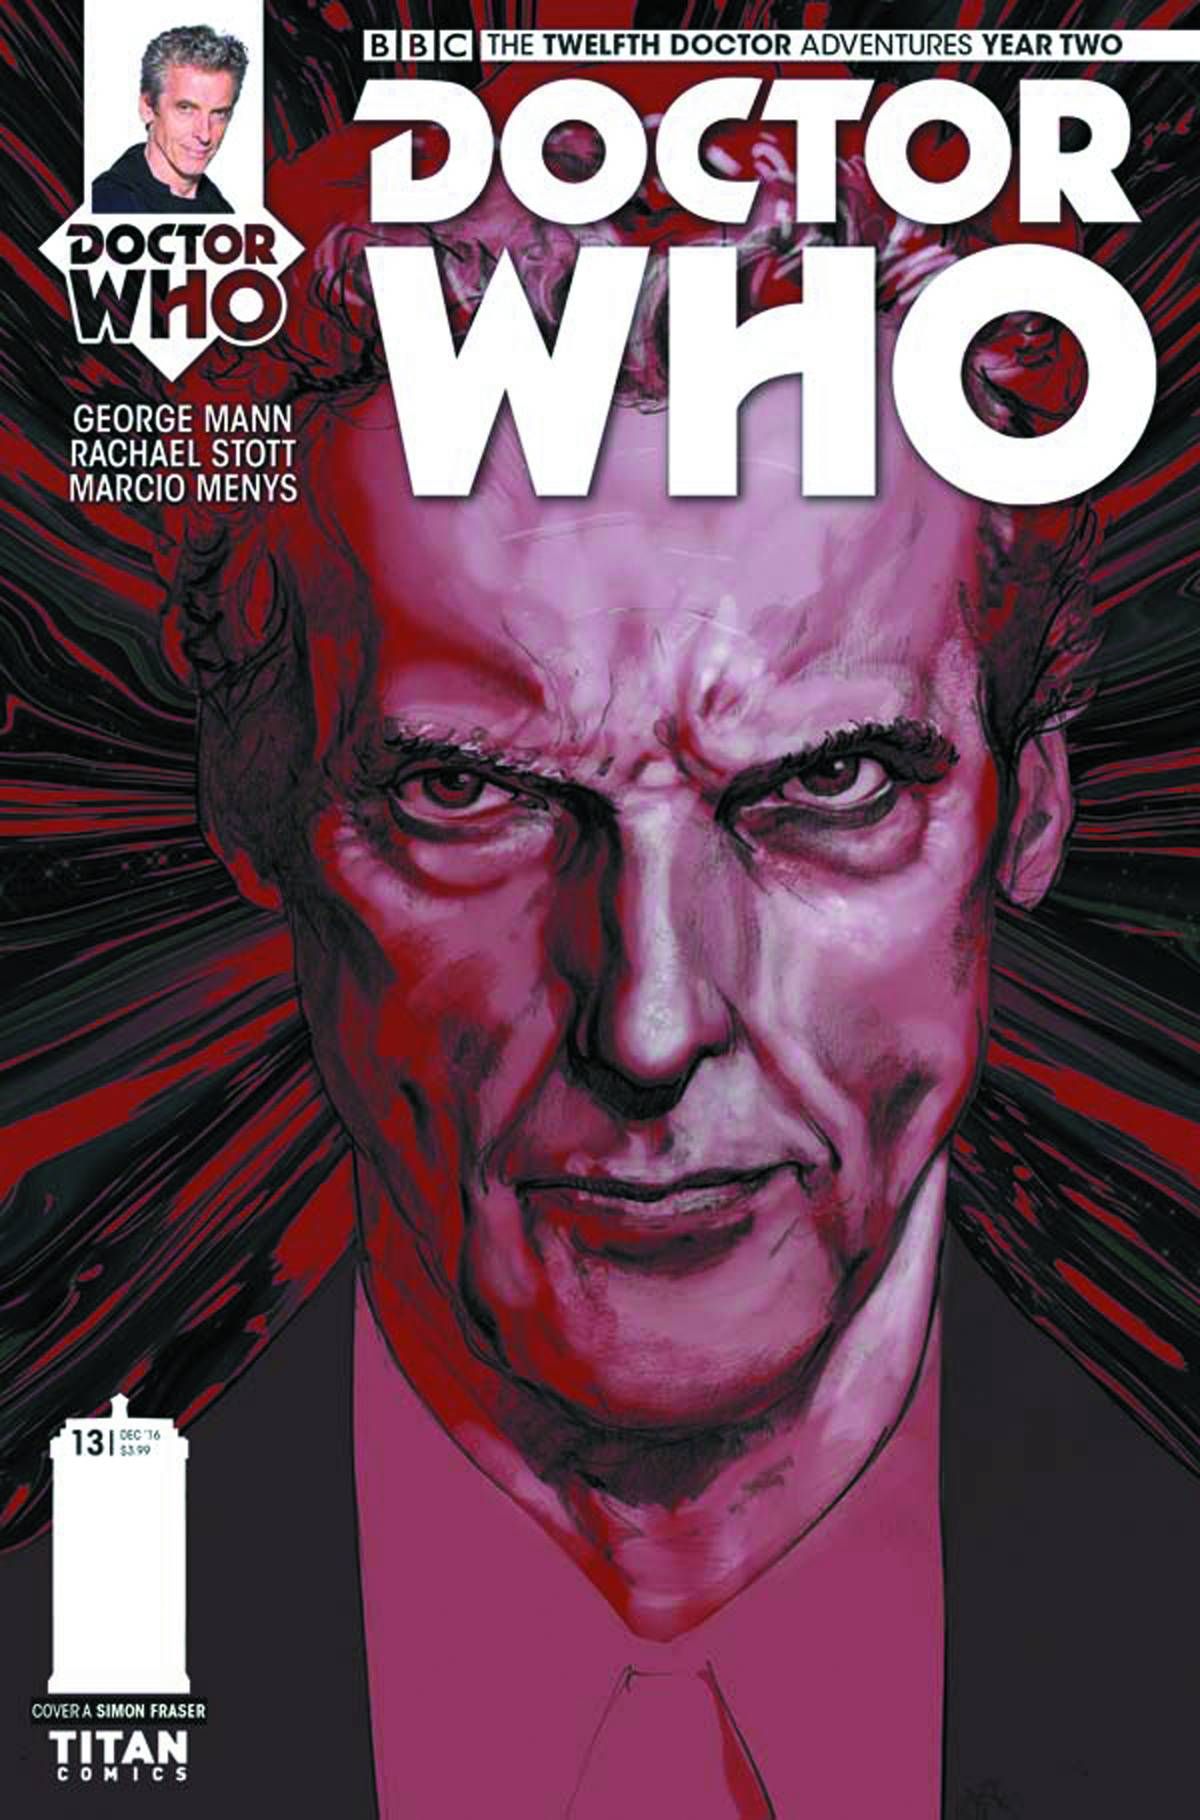 Doctor who: The Twelfth Doctor Year Two #13 Comic